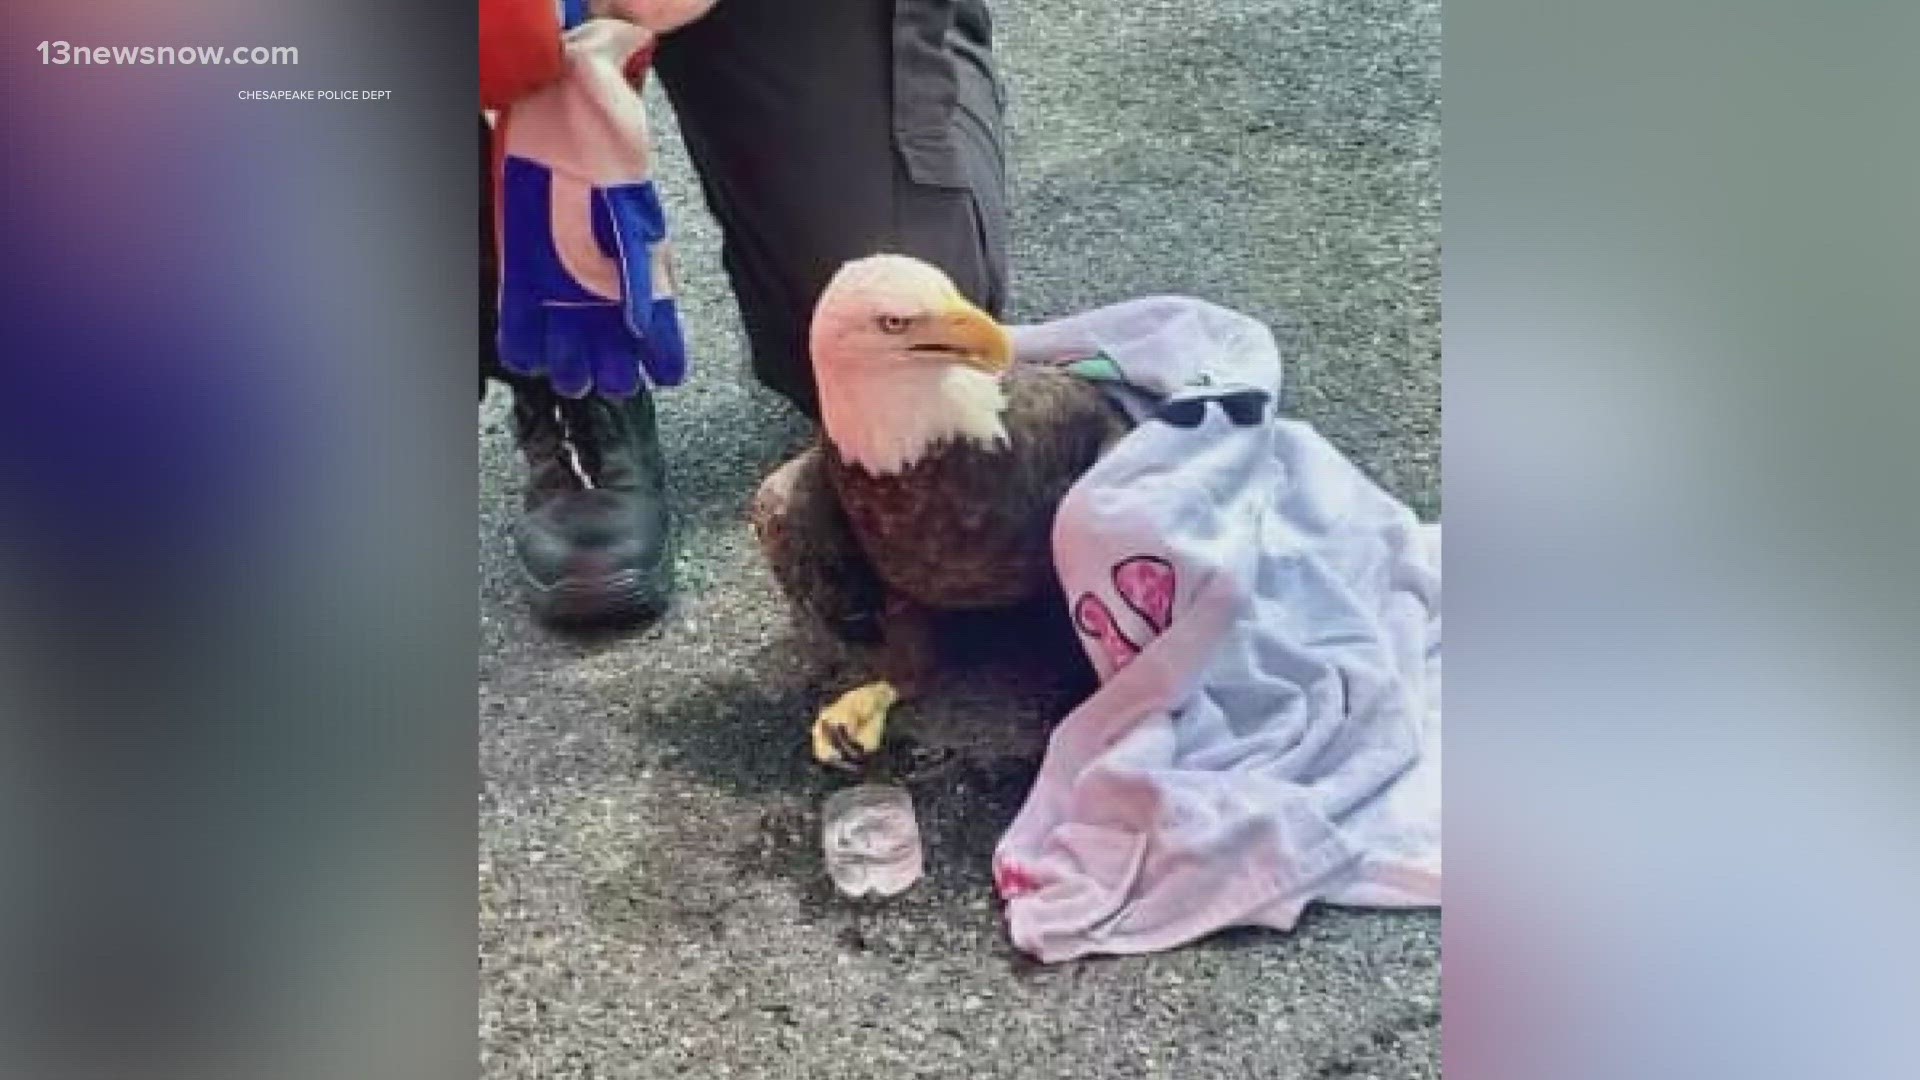 A police officer and animal control officer found an injured bald eagle near "Crossways Boulevard".